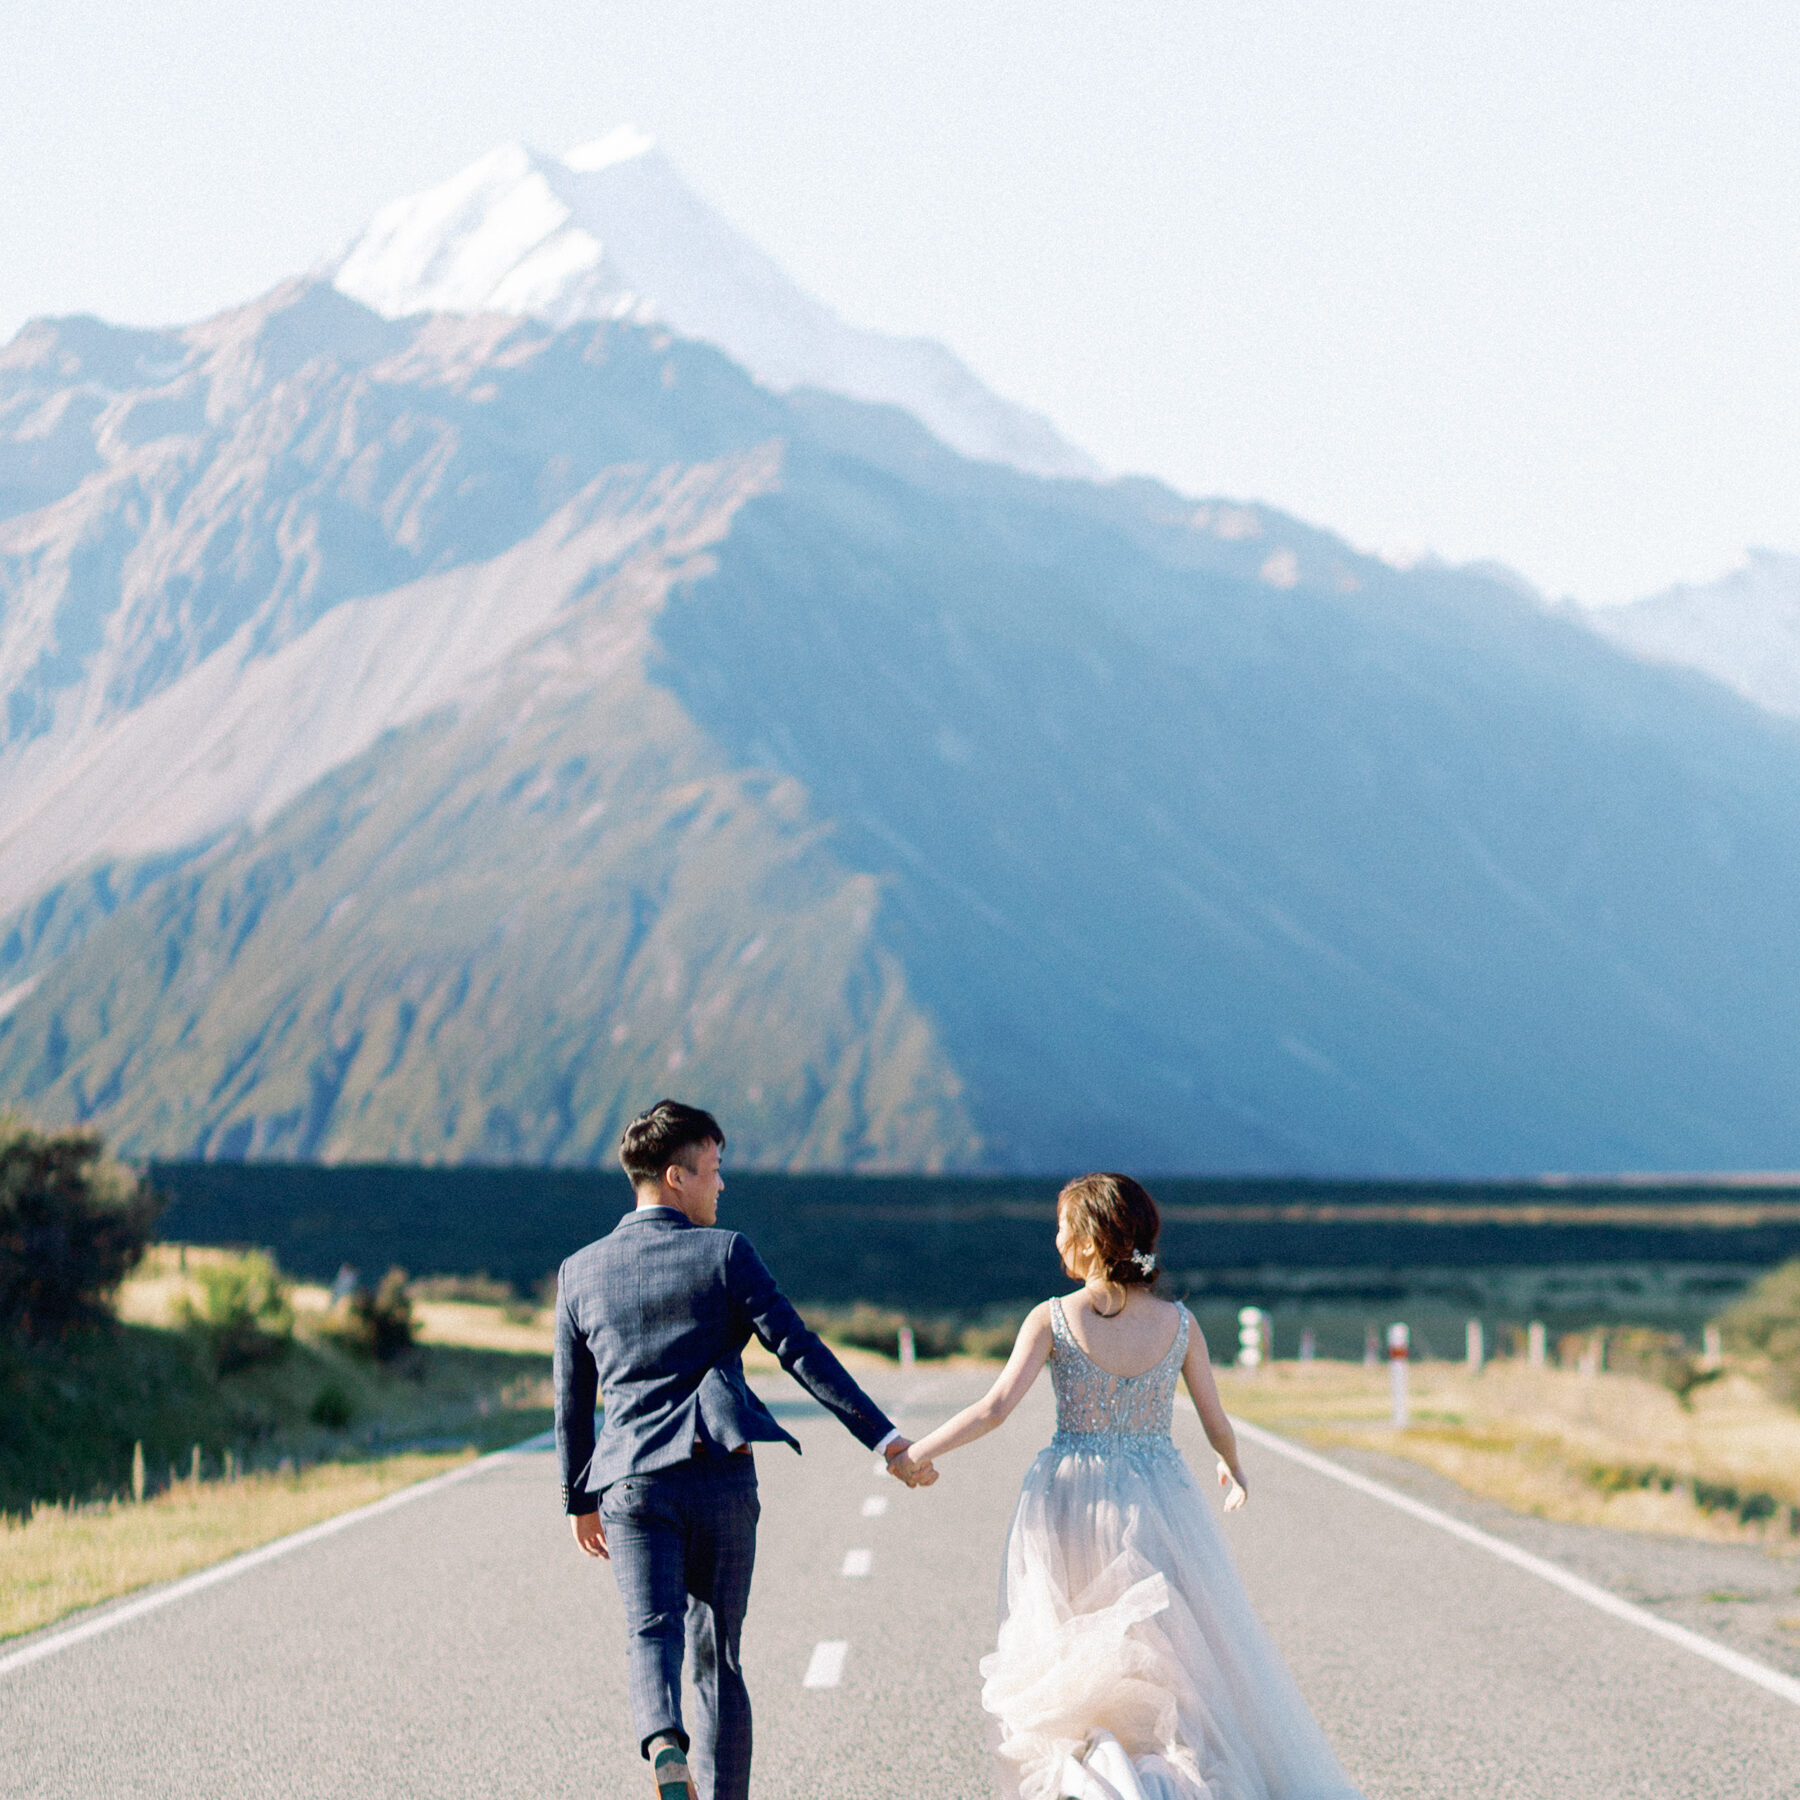 Destination pre-wedding featuring the stunning landscapes of New Zealand